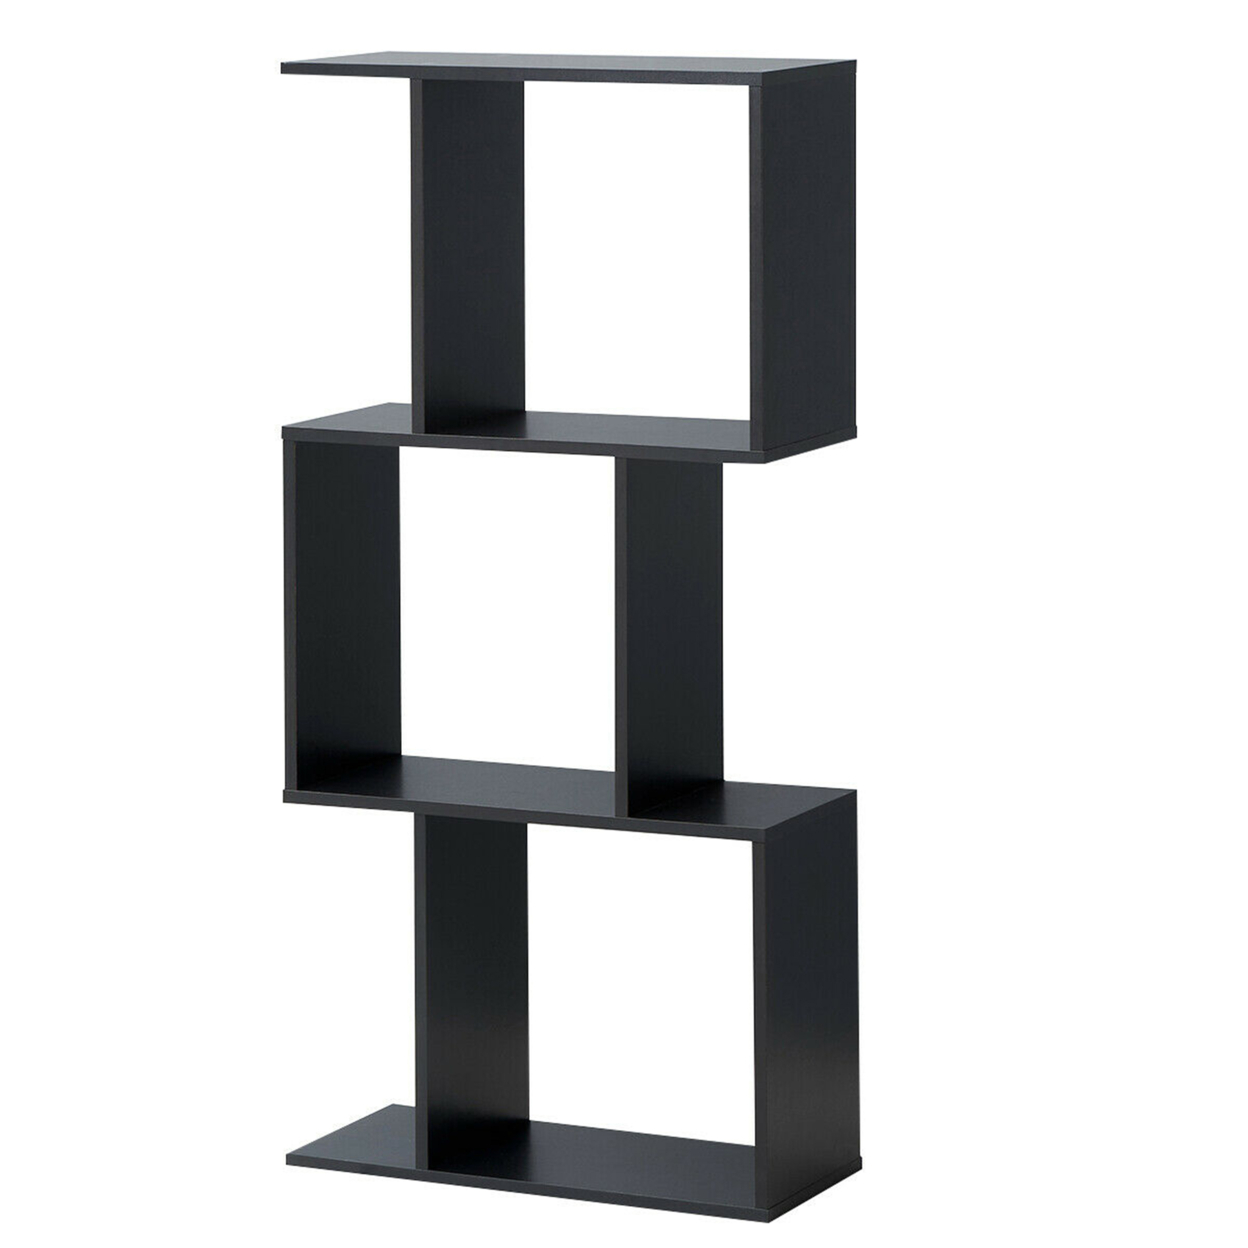 3-tier S-Shaped Bookcase Free Standing Storage Rack Wooden Display Decor Black